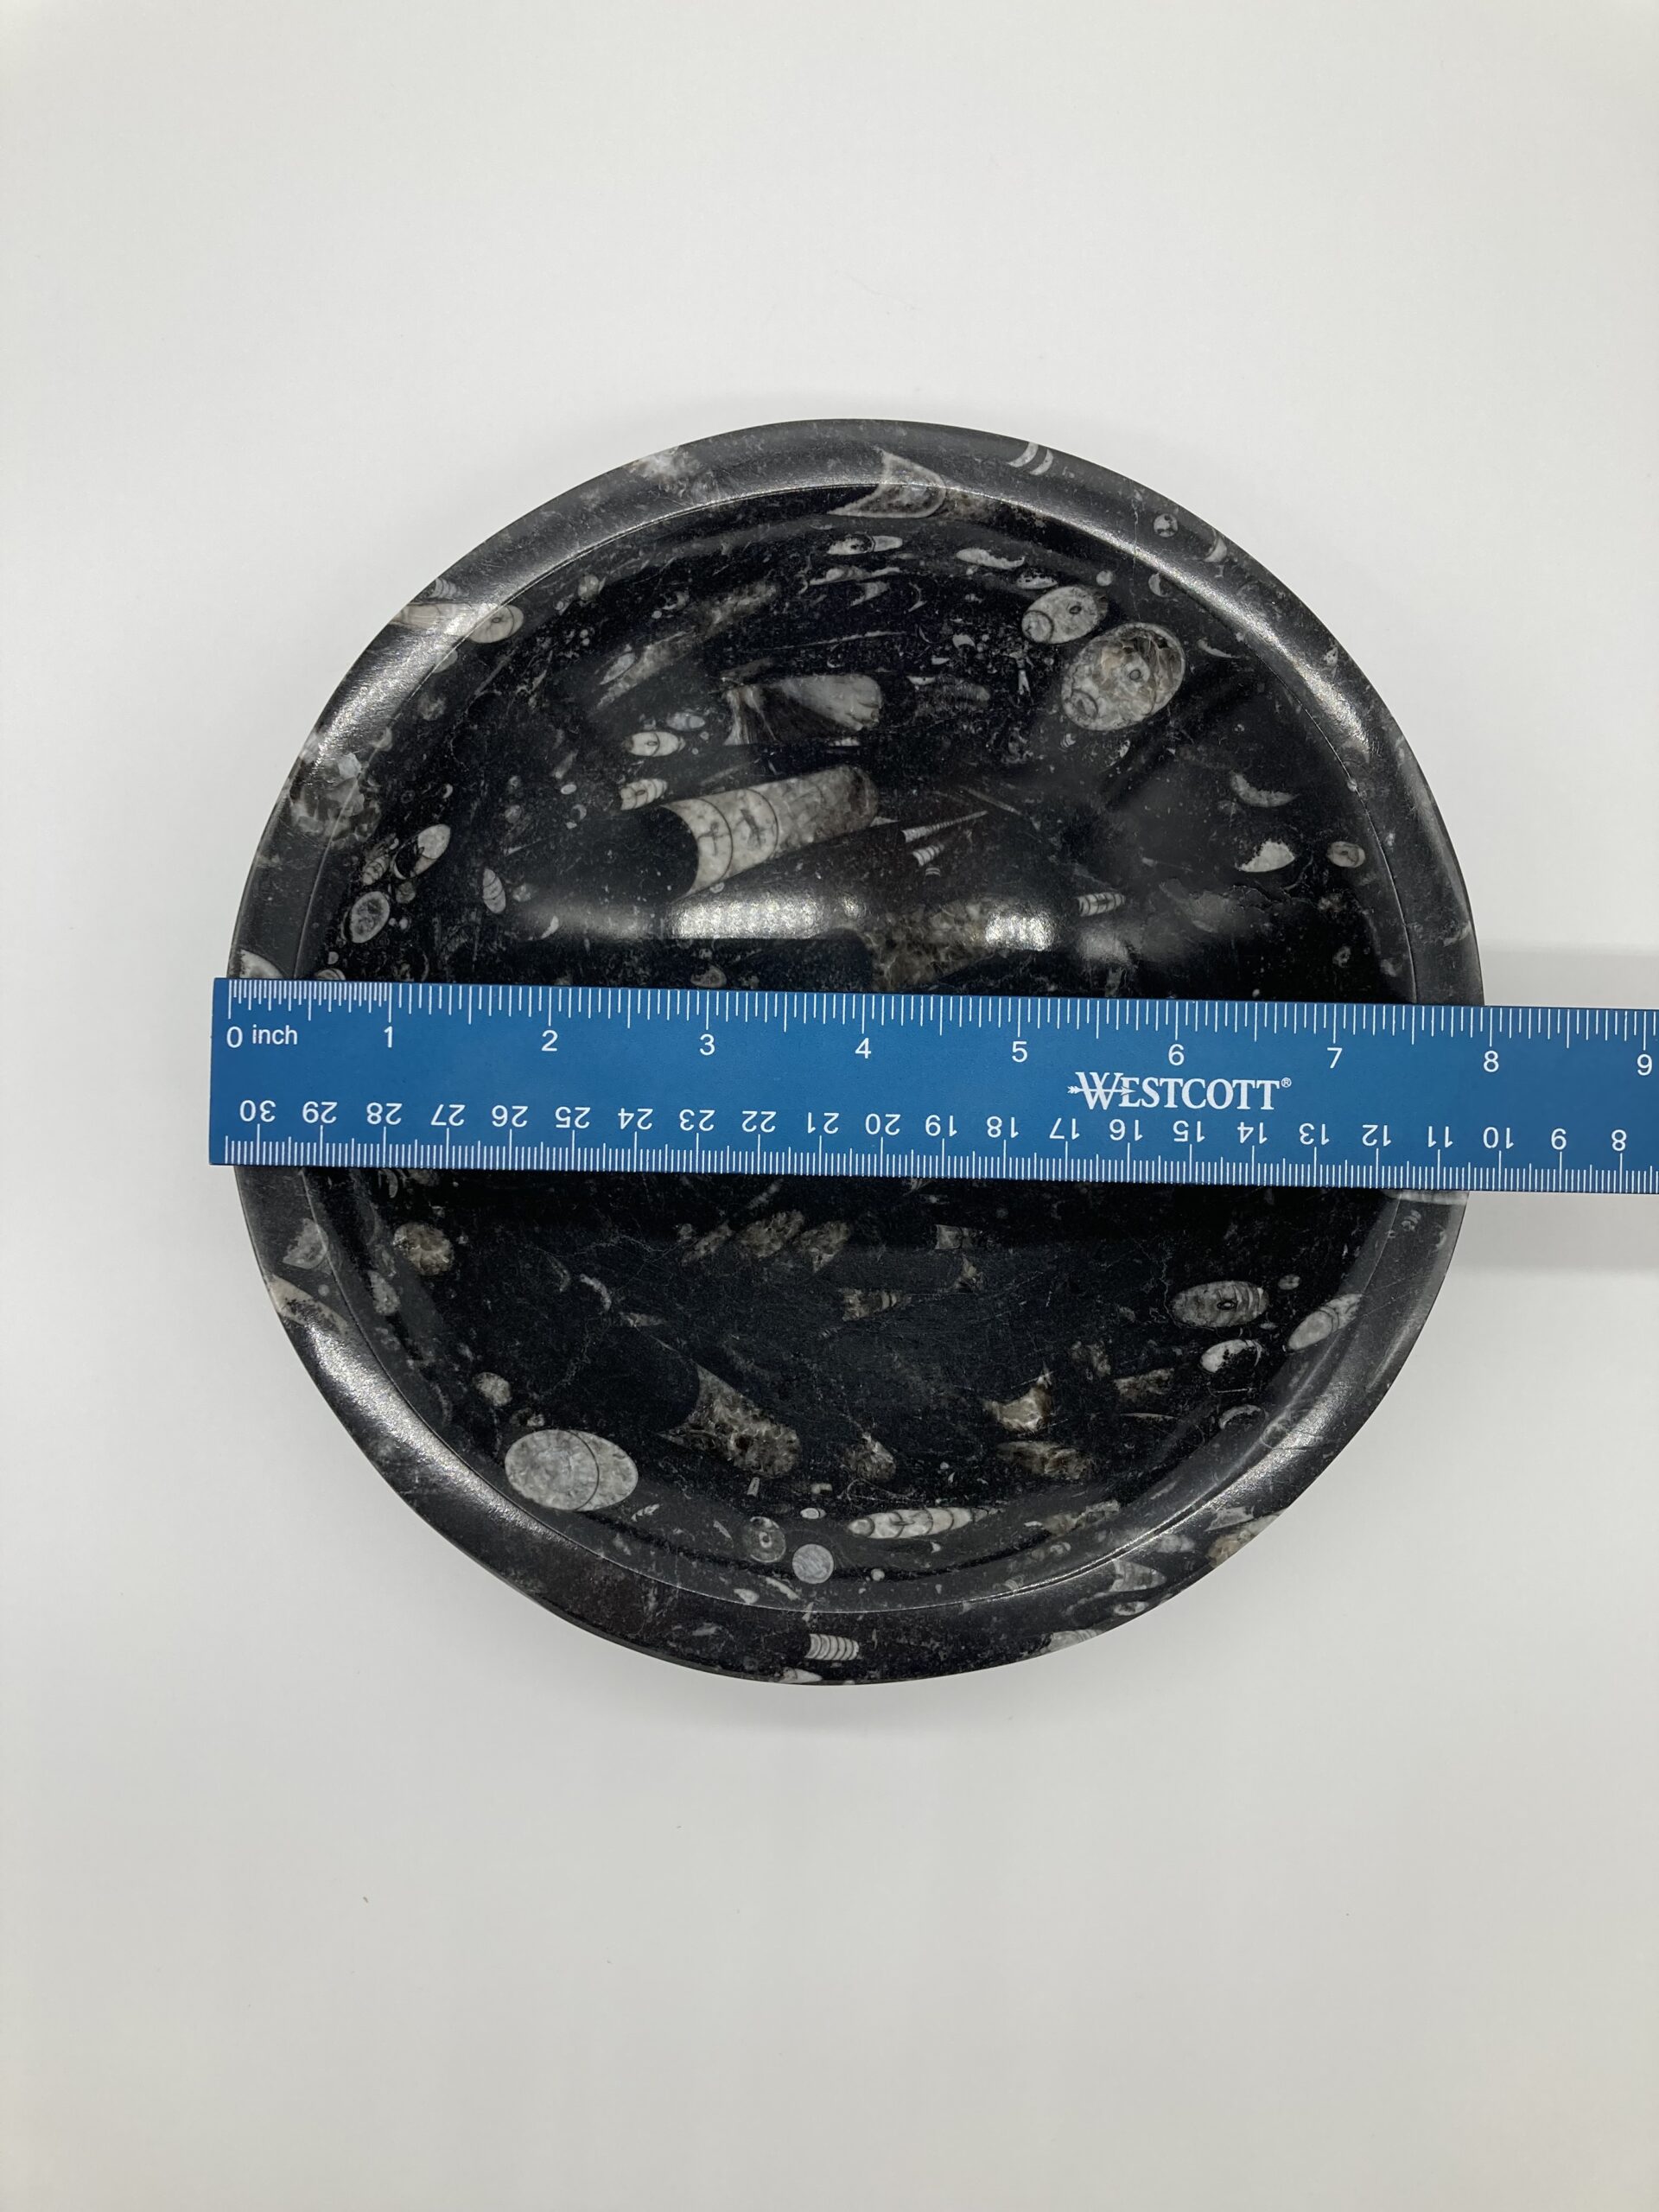 Orthoceras bowl with ruler